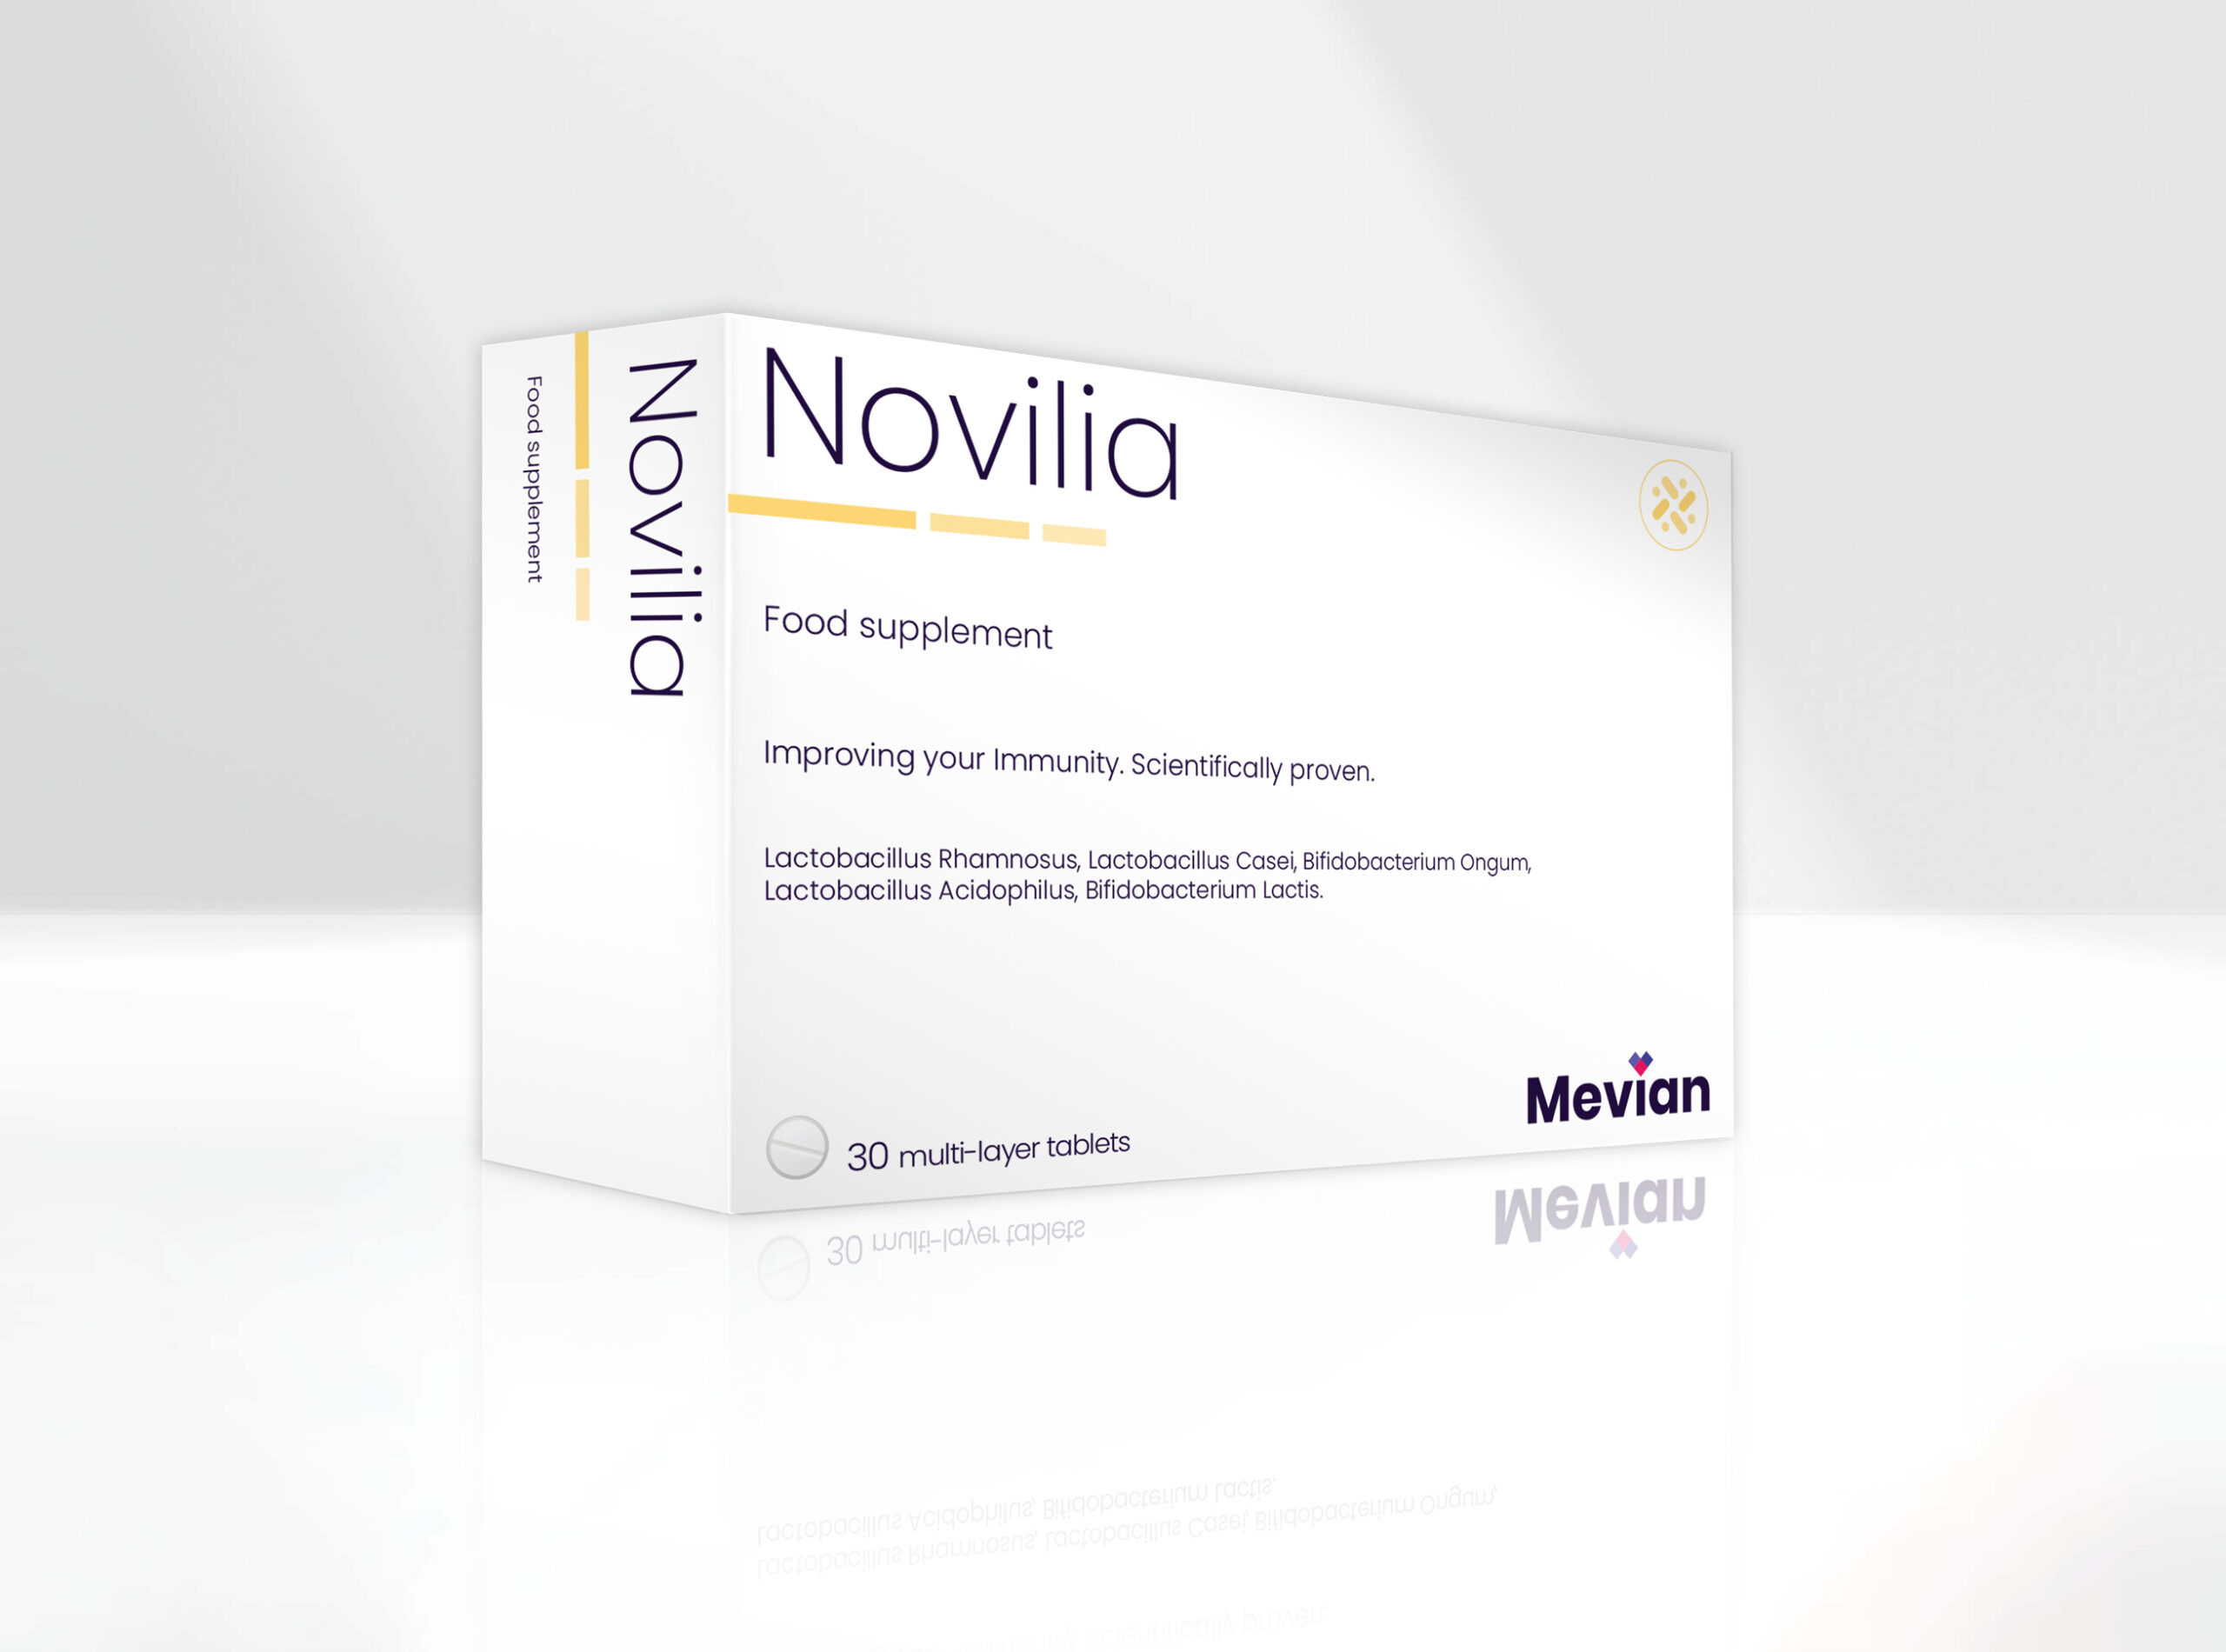 Novilia relieves viral infection symptoms and is indicated as a must-have immune booster support—a novel efficacy immunoprotective probiotic.